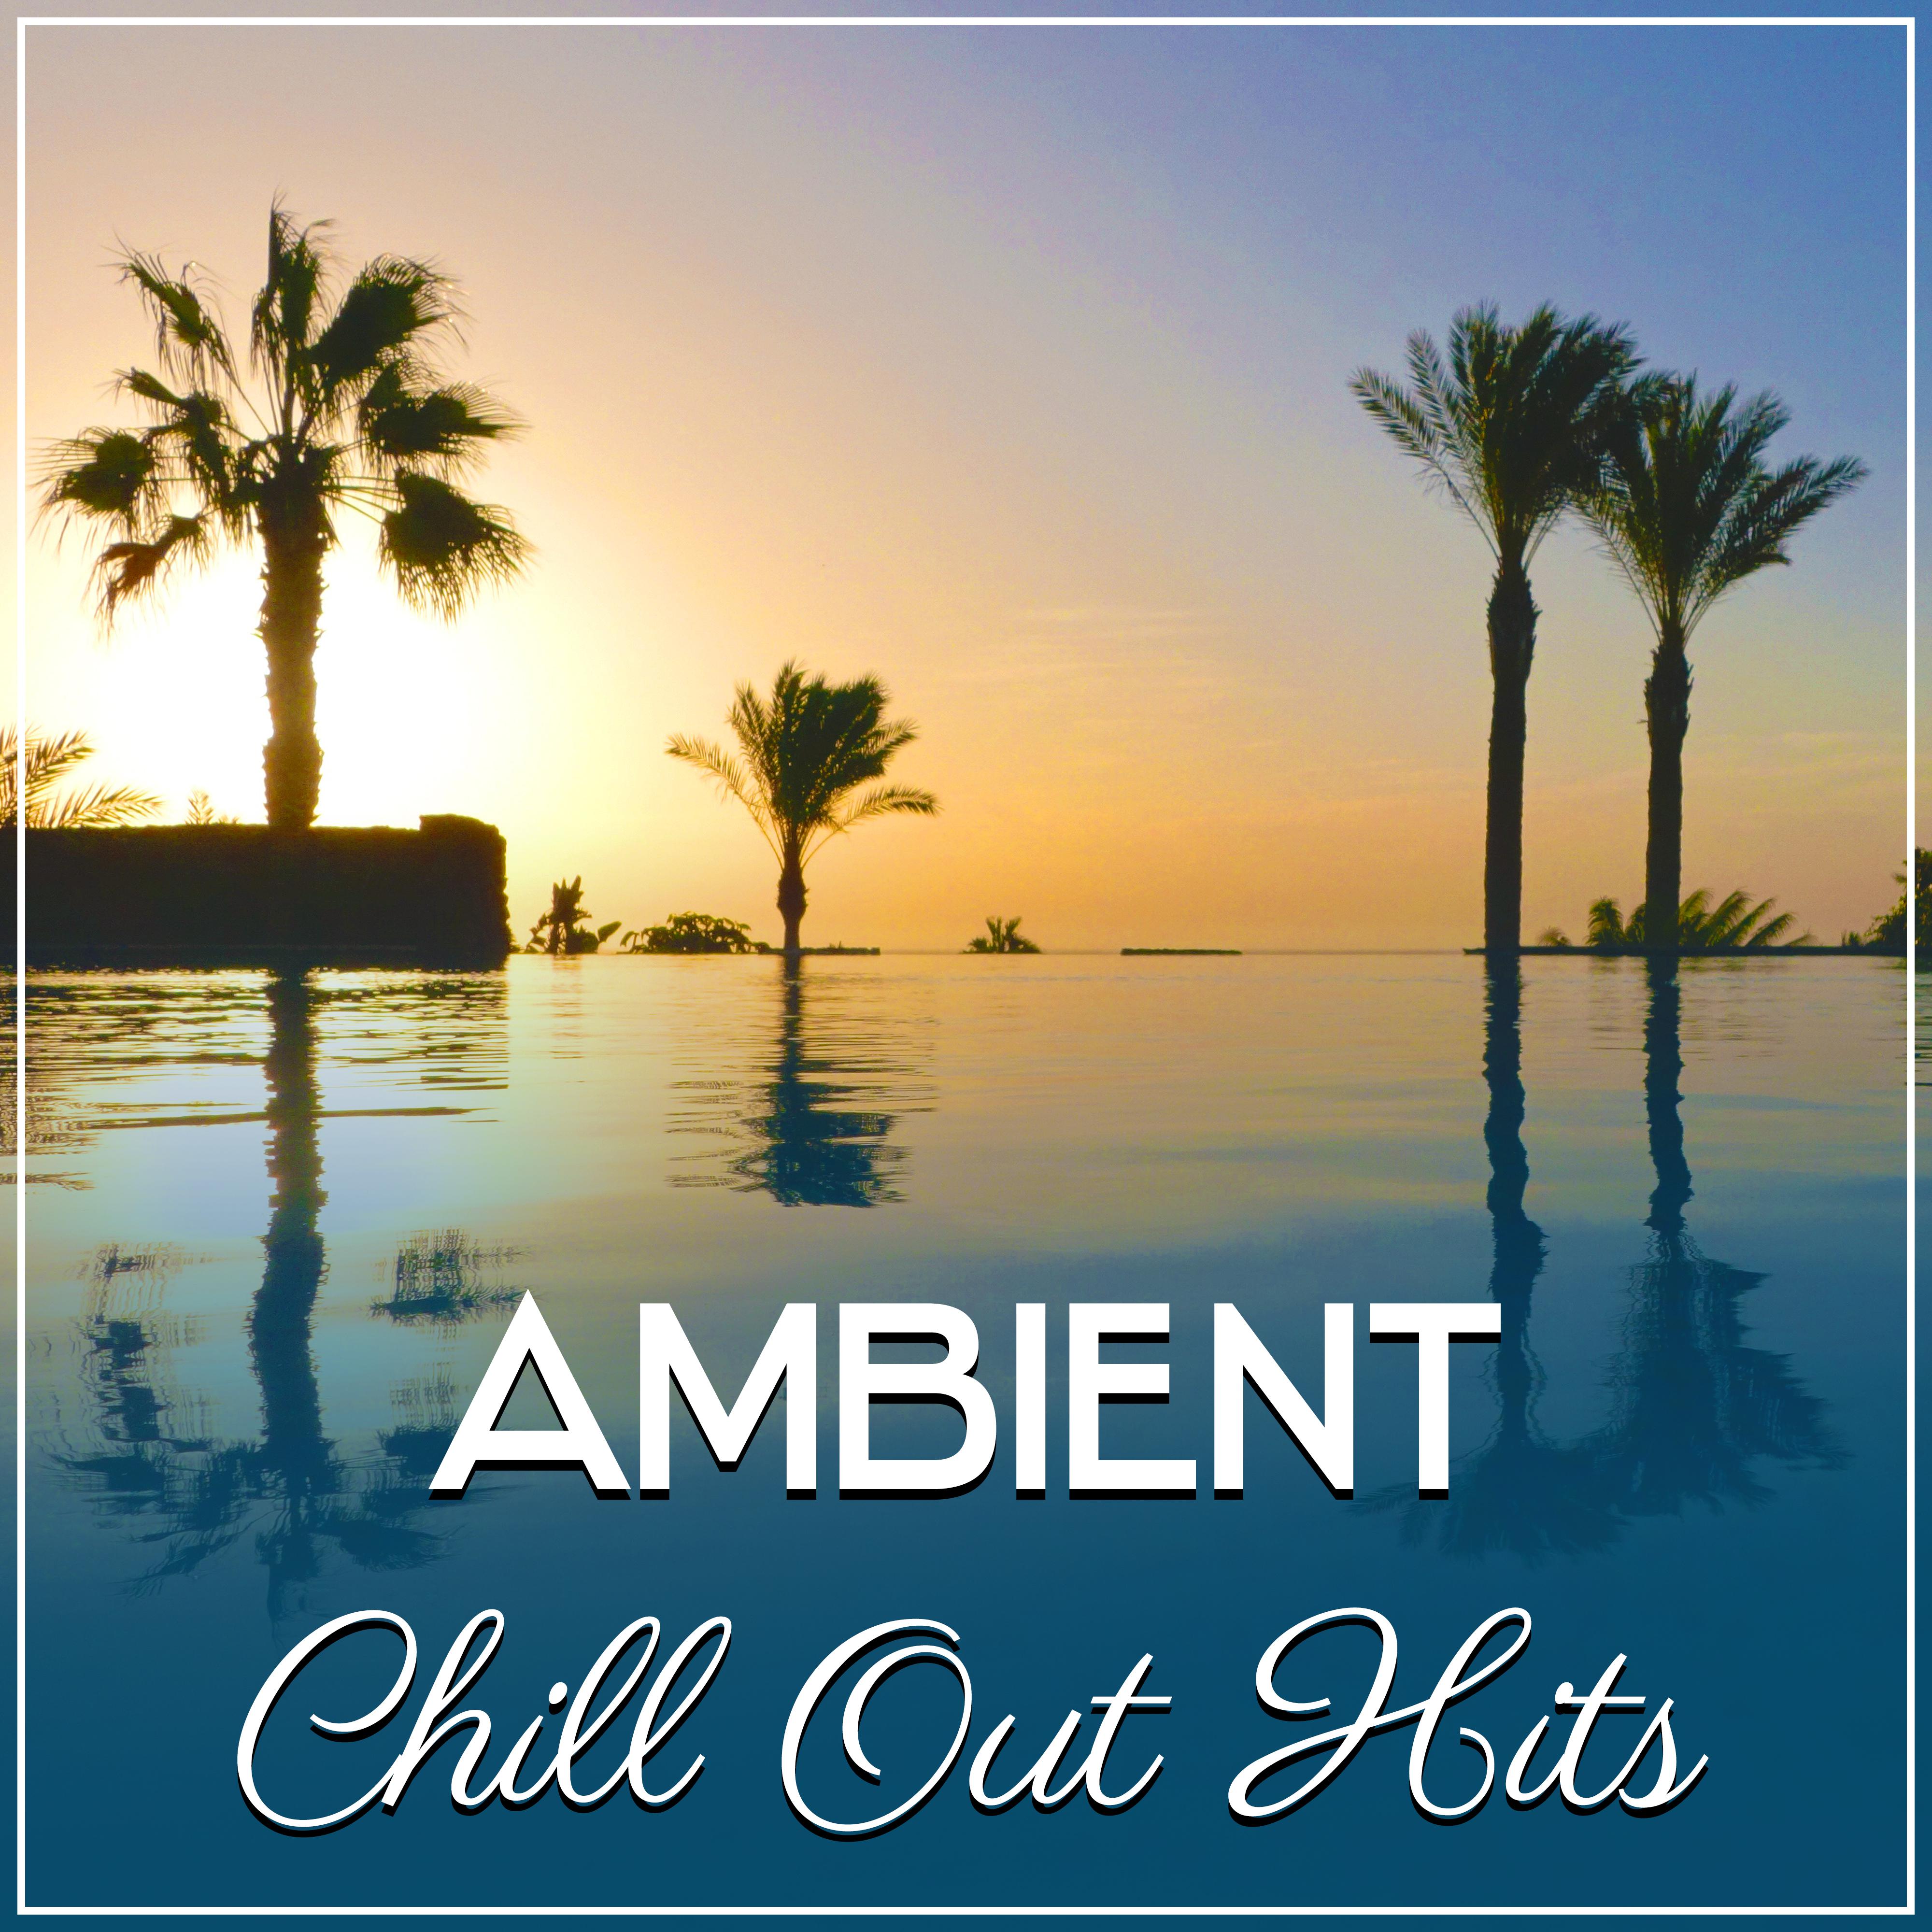 Ambient Chill Out Hits  Total Relaxed, Chill Out,  Chill Lounge, Summer Music